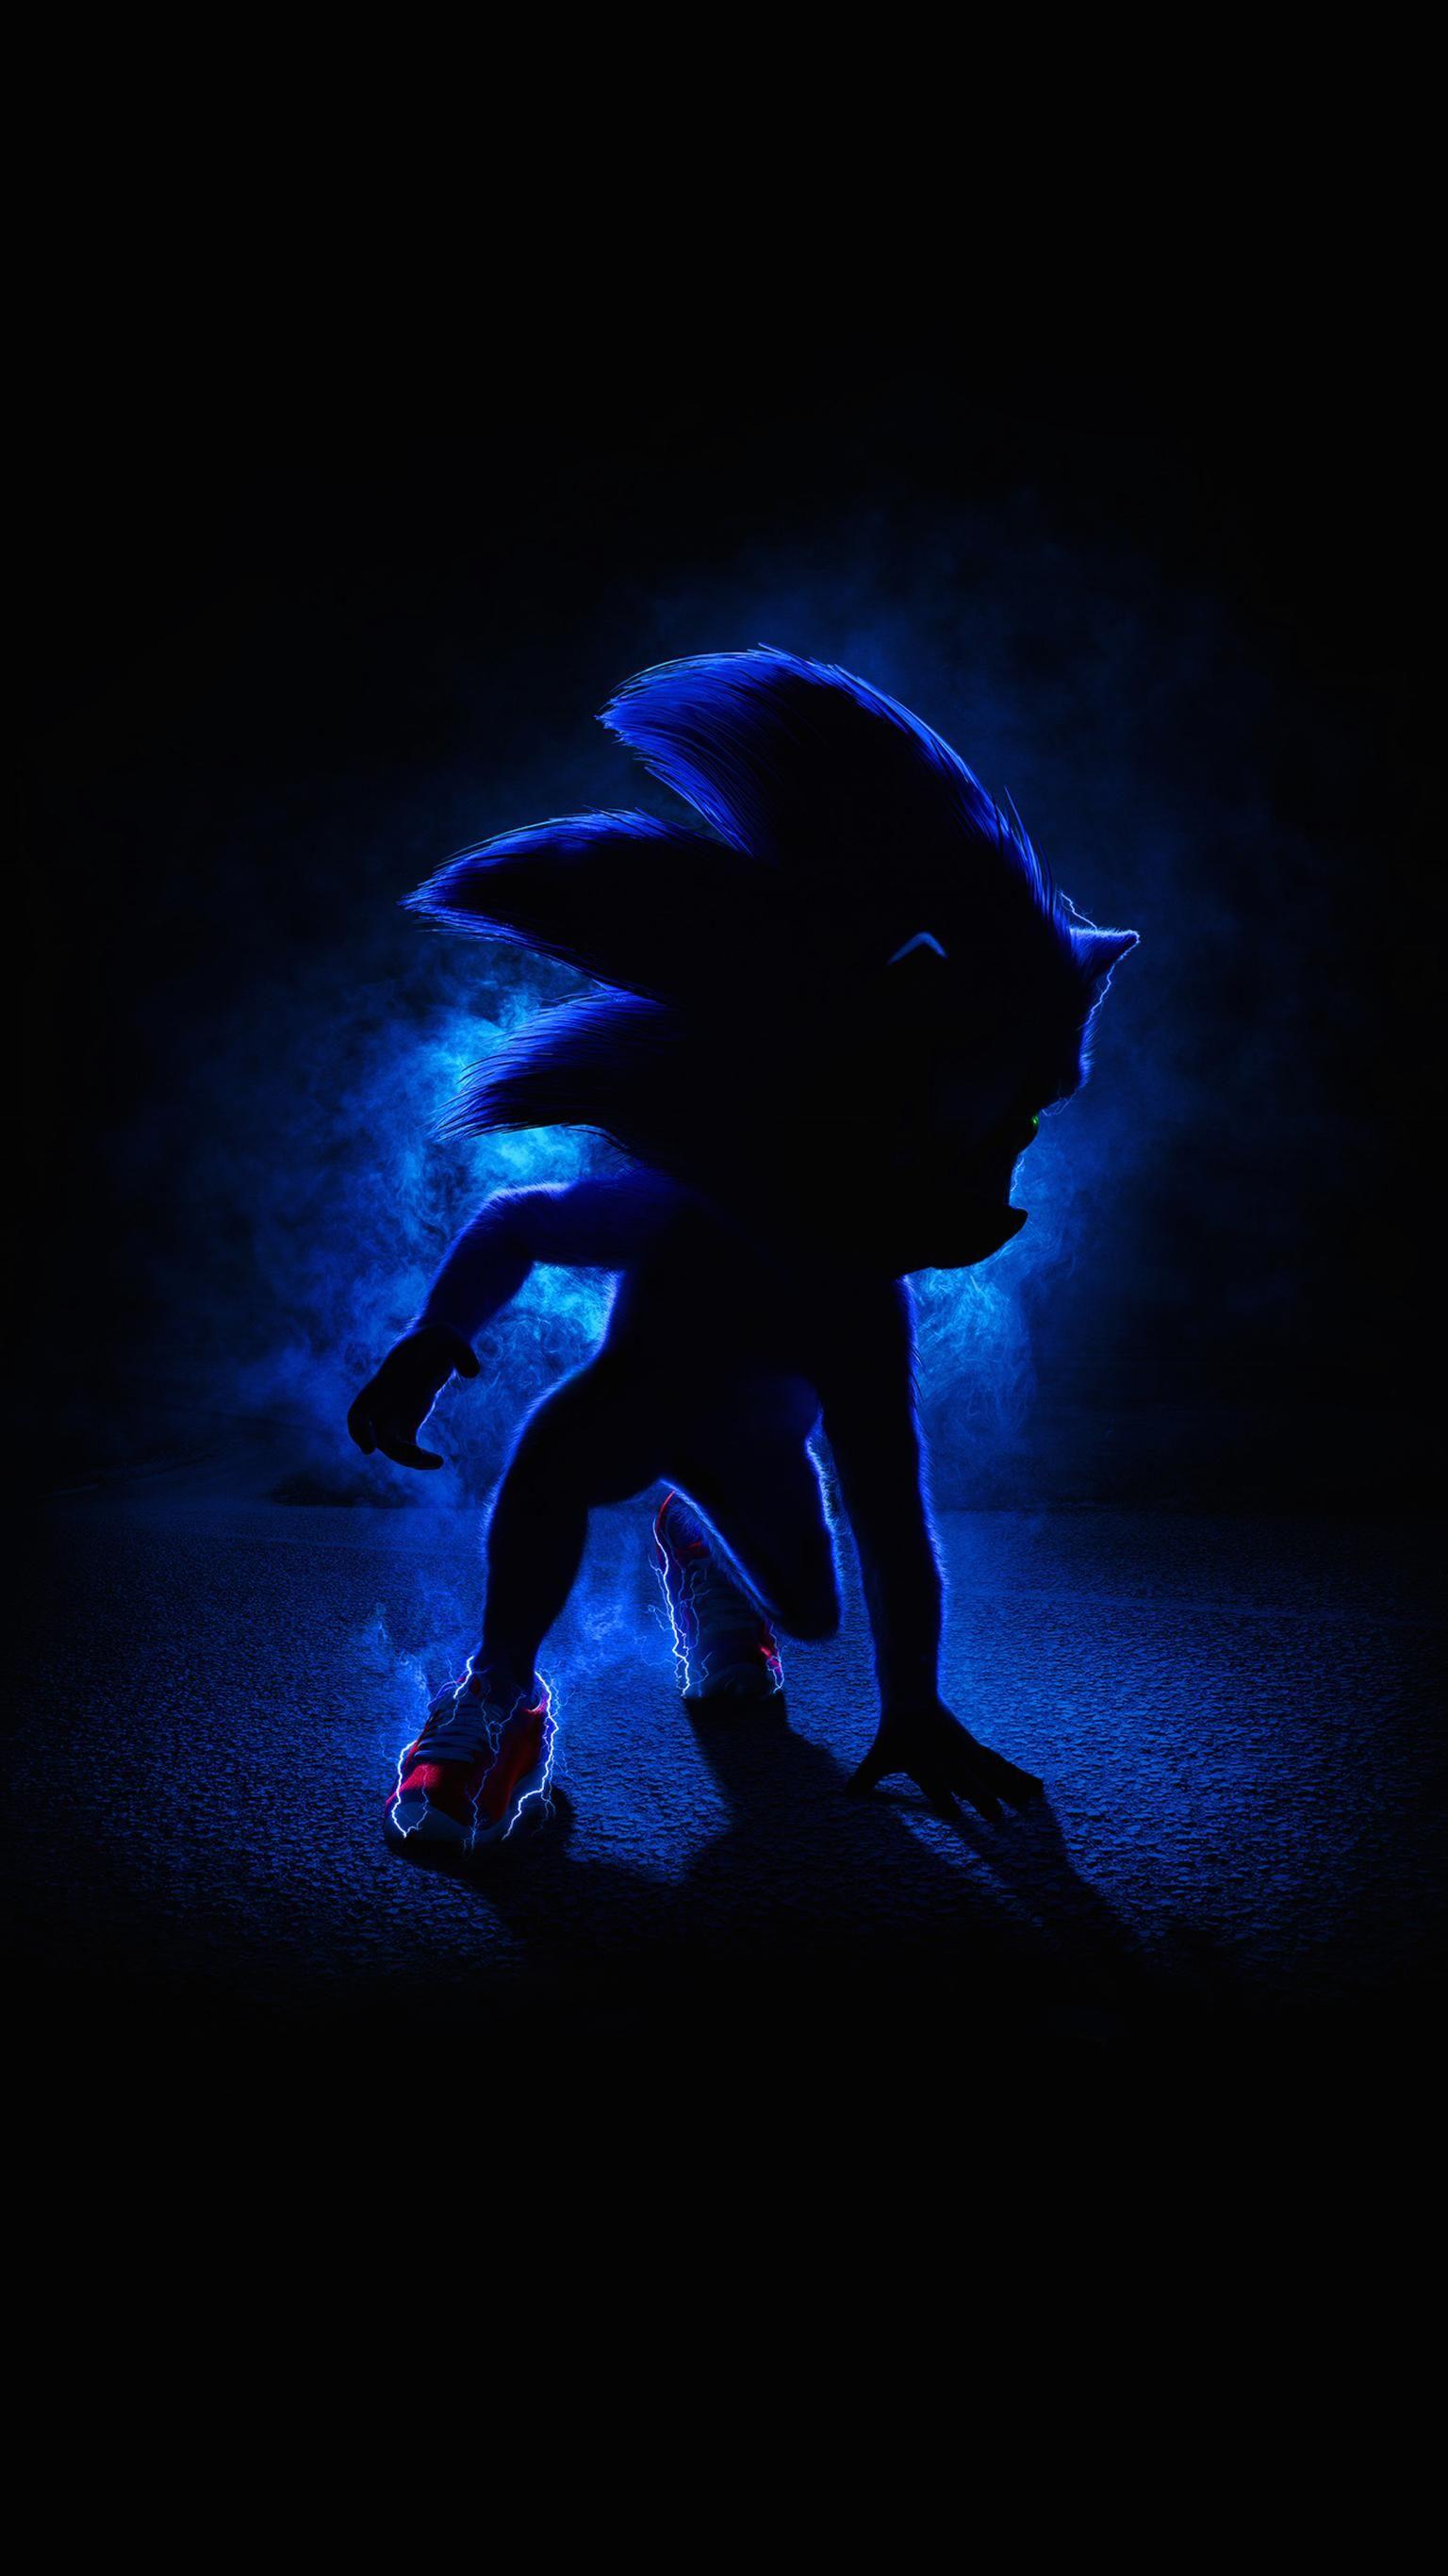 Sonic The Hedgehog Movie Wallpapers Wallpaper Cave